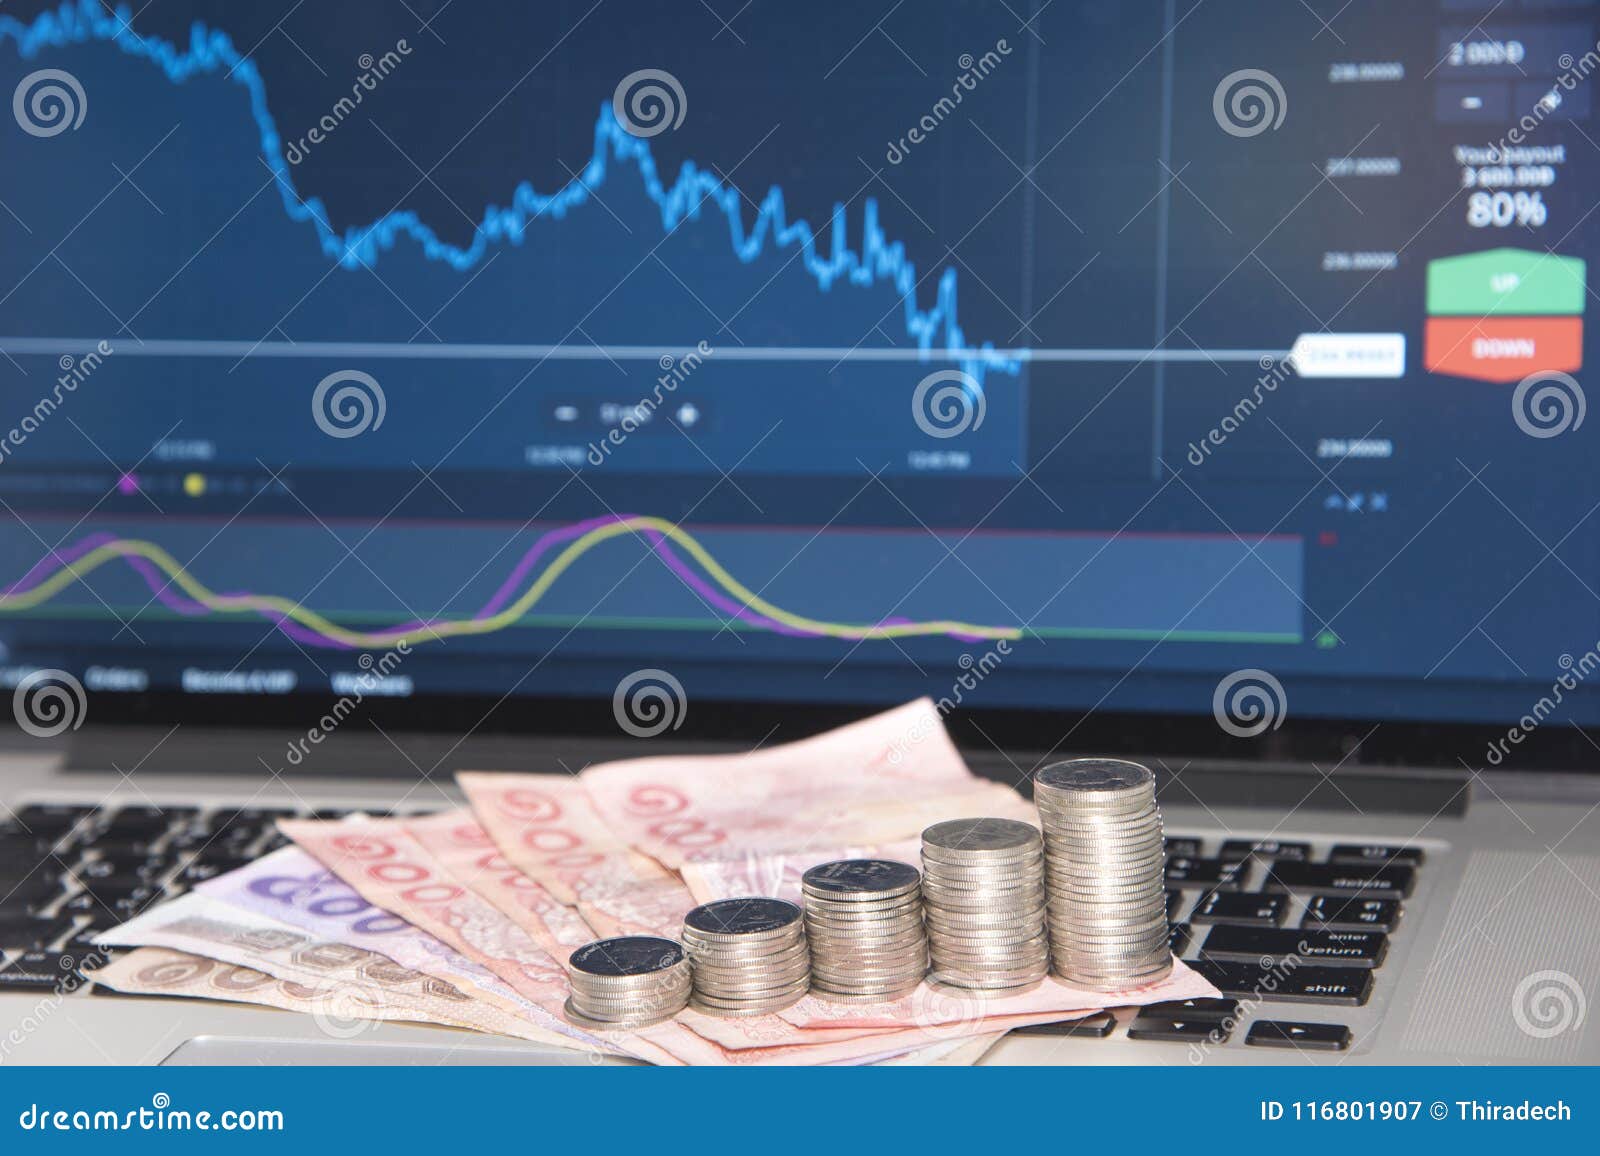 Trading Markets Forex Currency Trading Stock Image Image Of - 